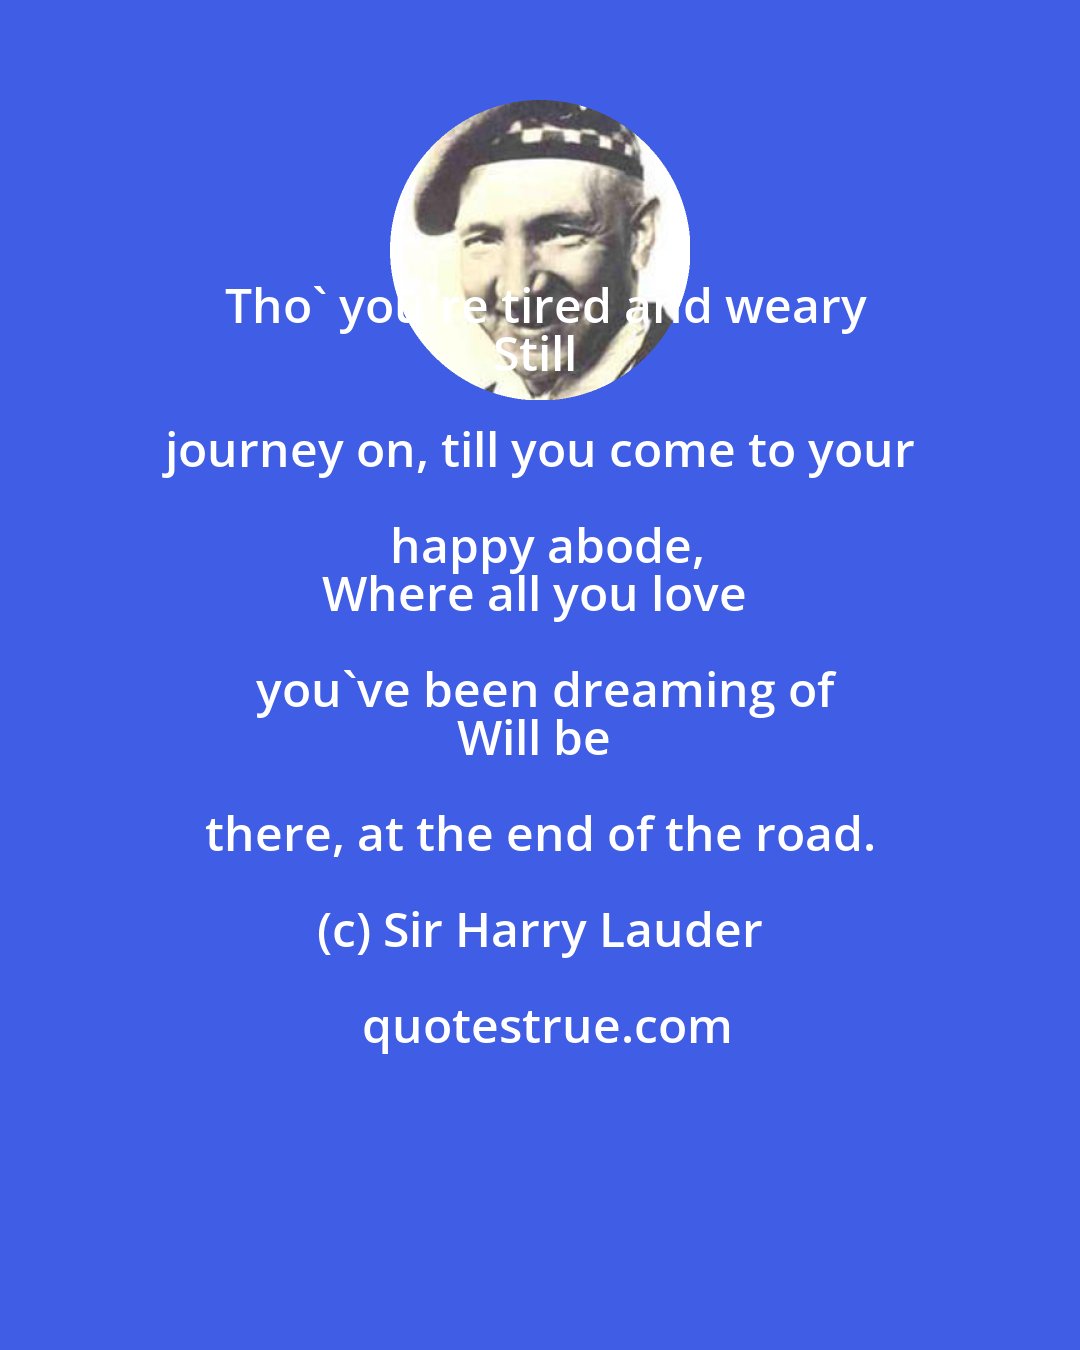 Sir Harry Lauder: Tho' you're tired and weary
Still journey on, till you come to your happy abode,
Where all you love you've been dreaming of
Will be there, at the end of the road.